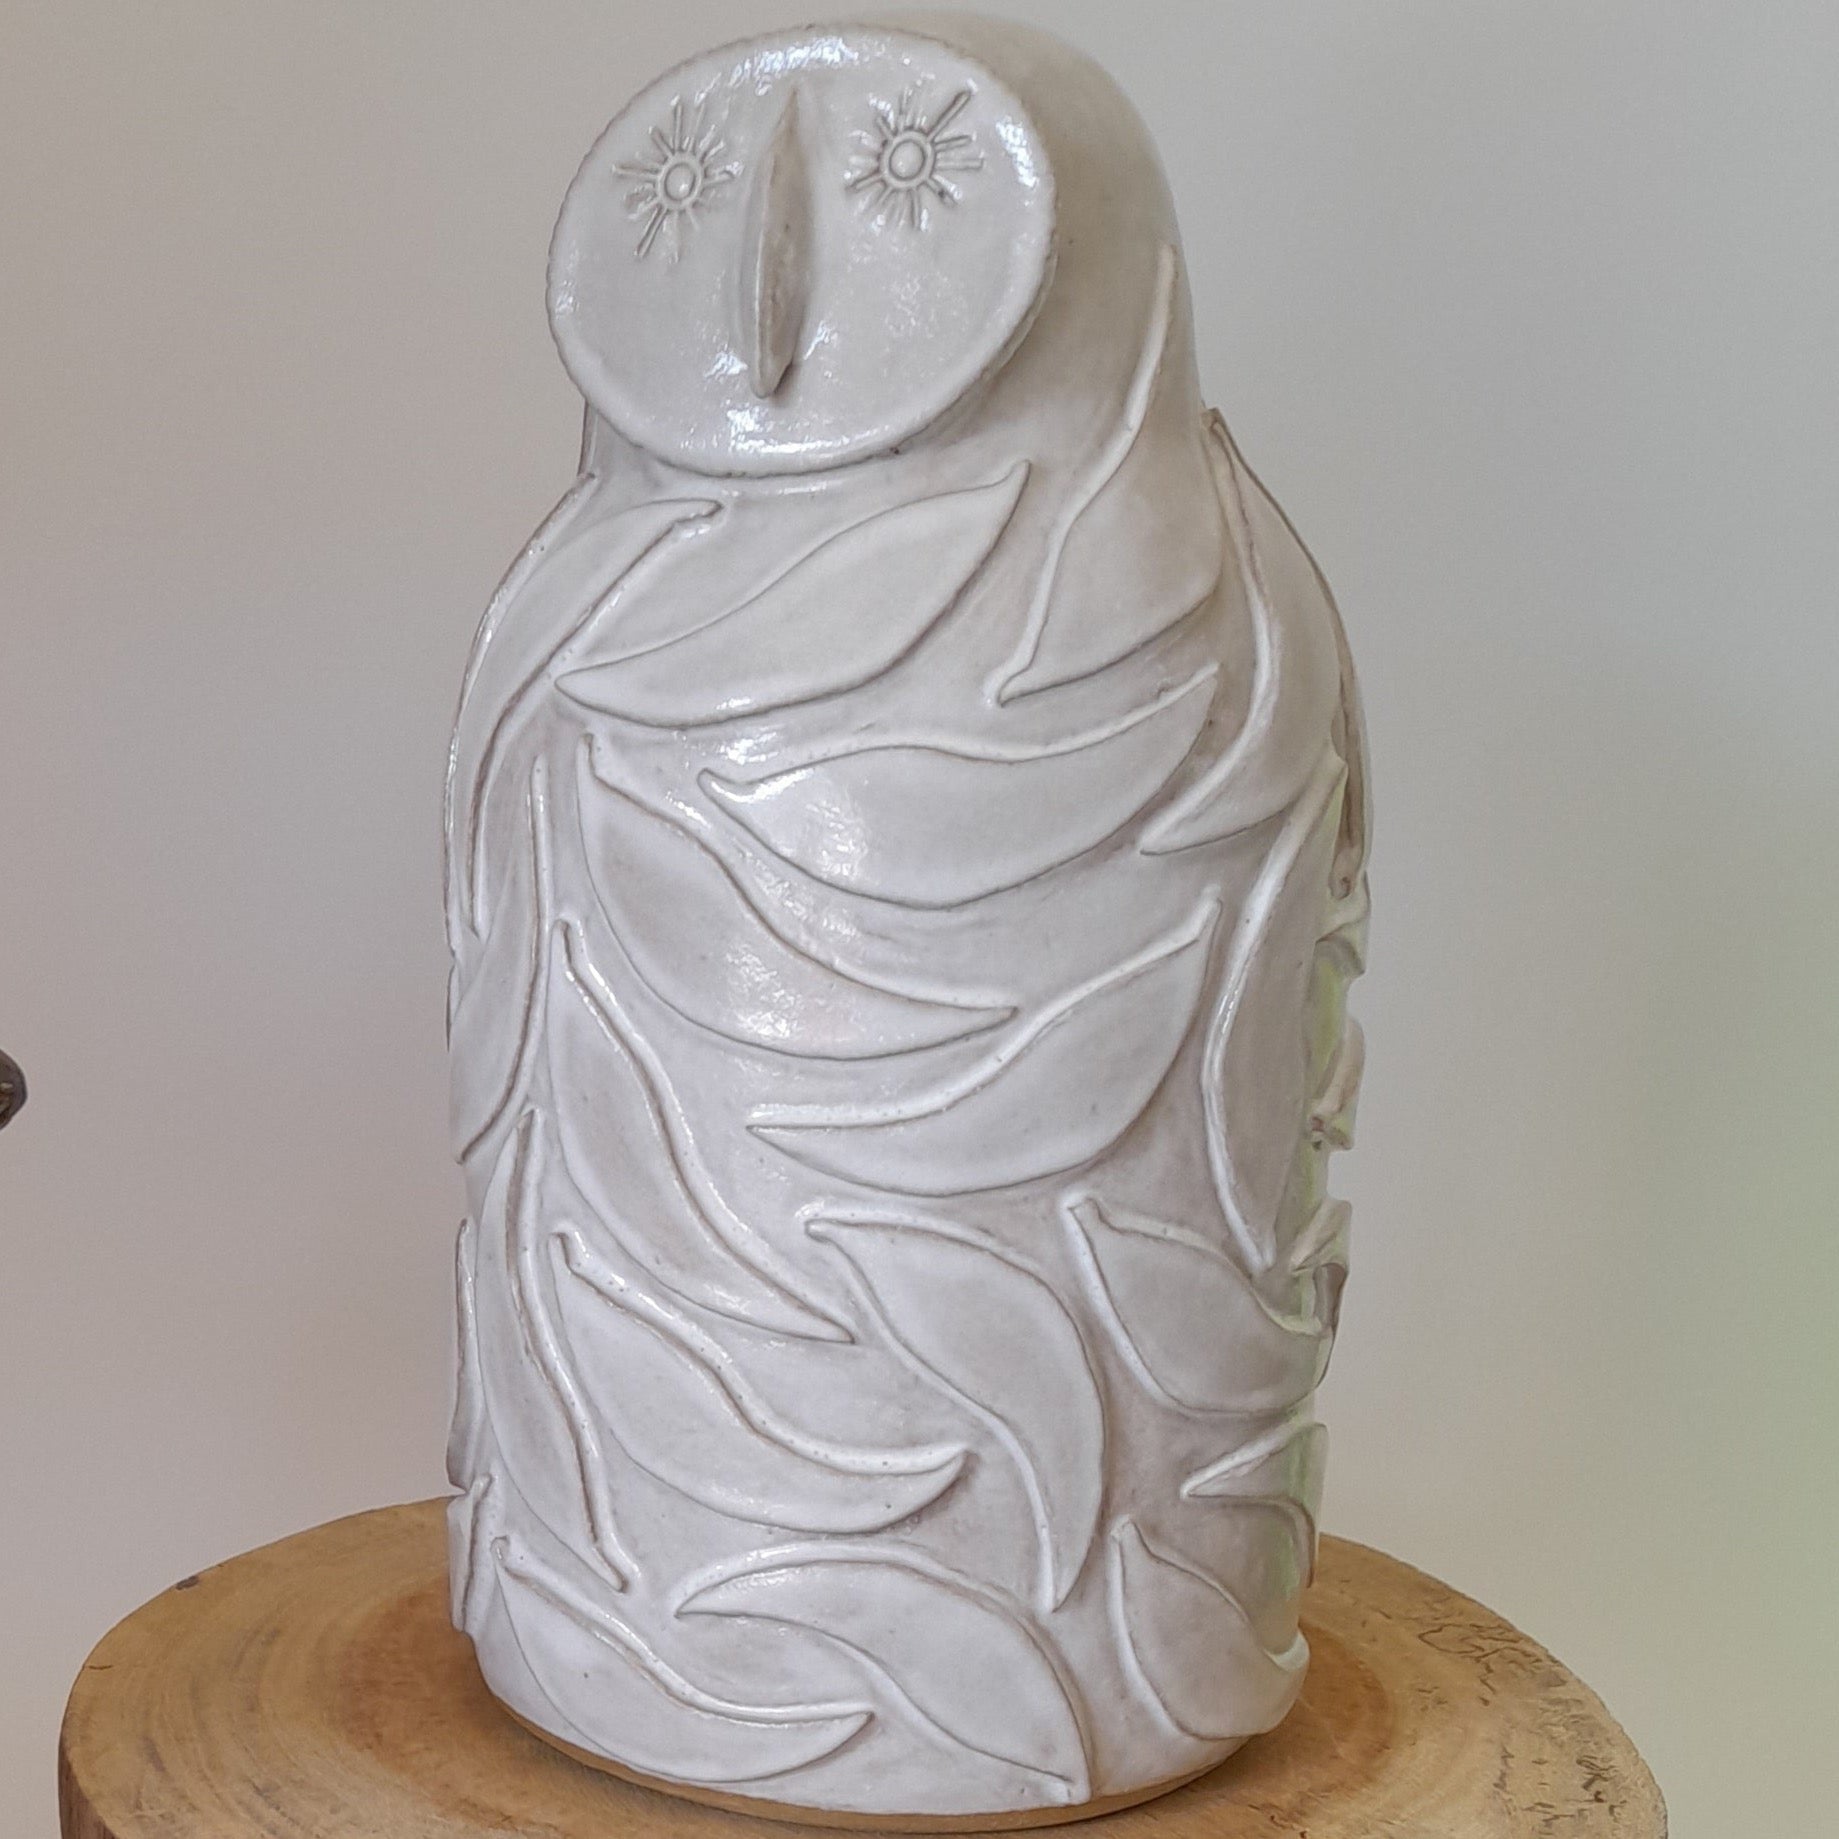 Moira Court - "Masked Forest Owl" Stoneware Beast (mco062)